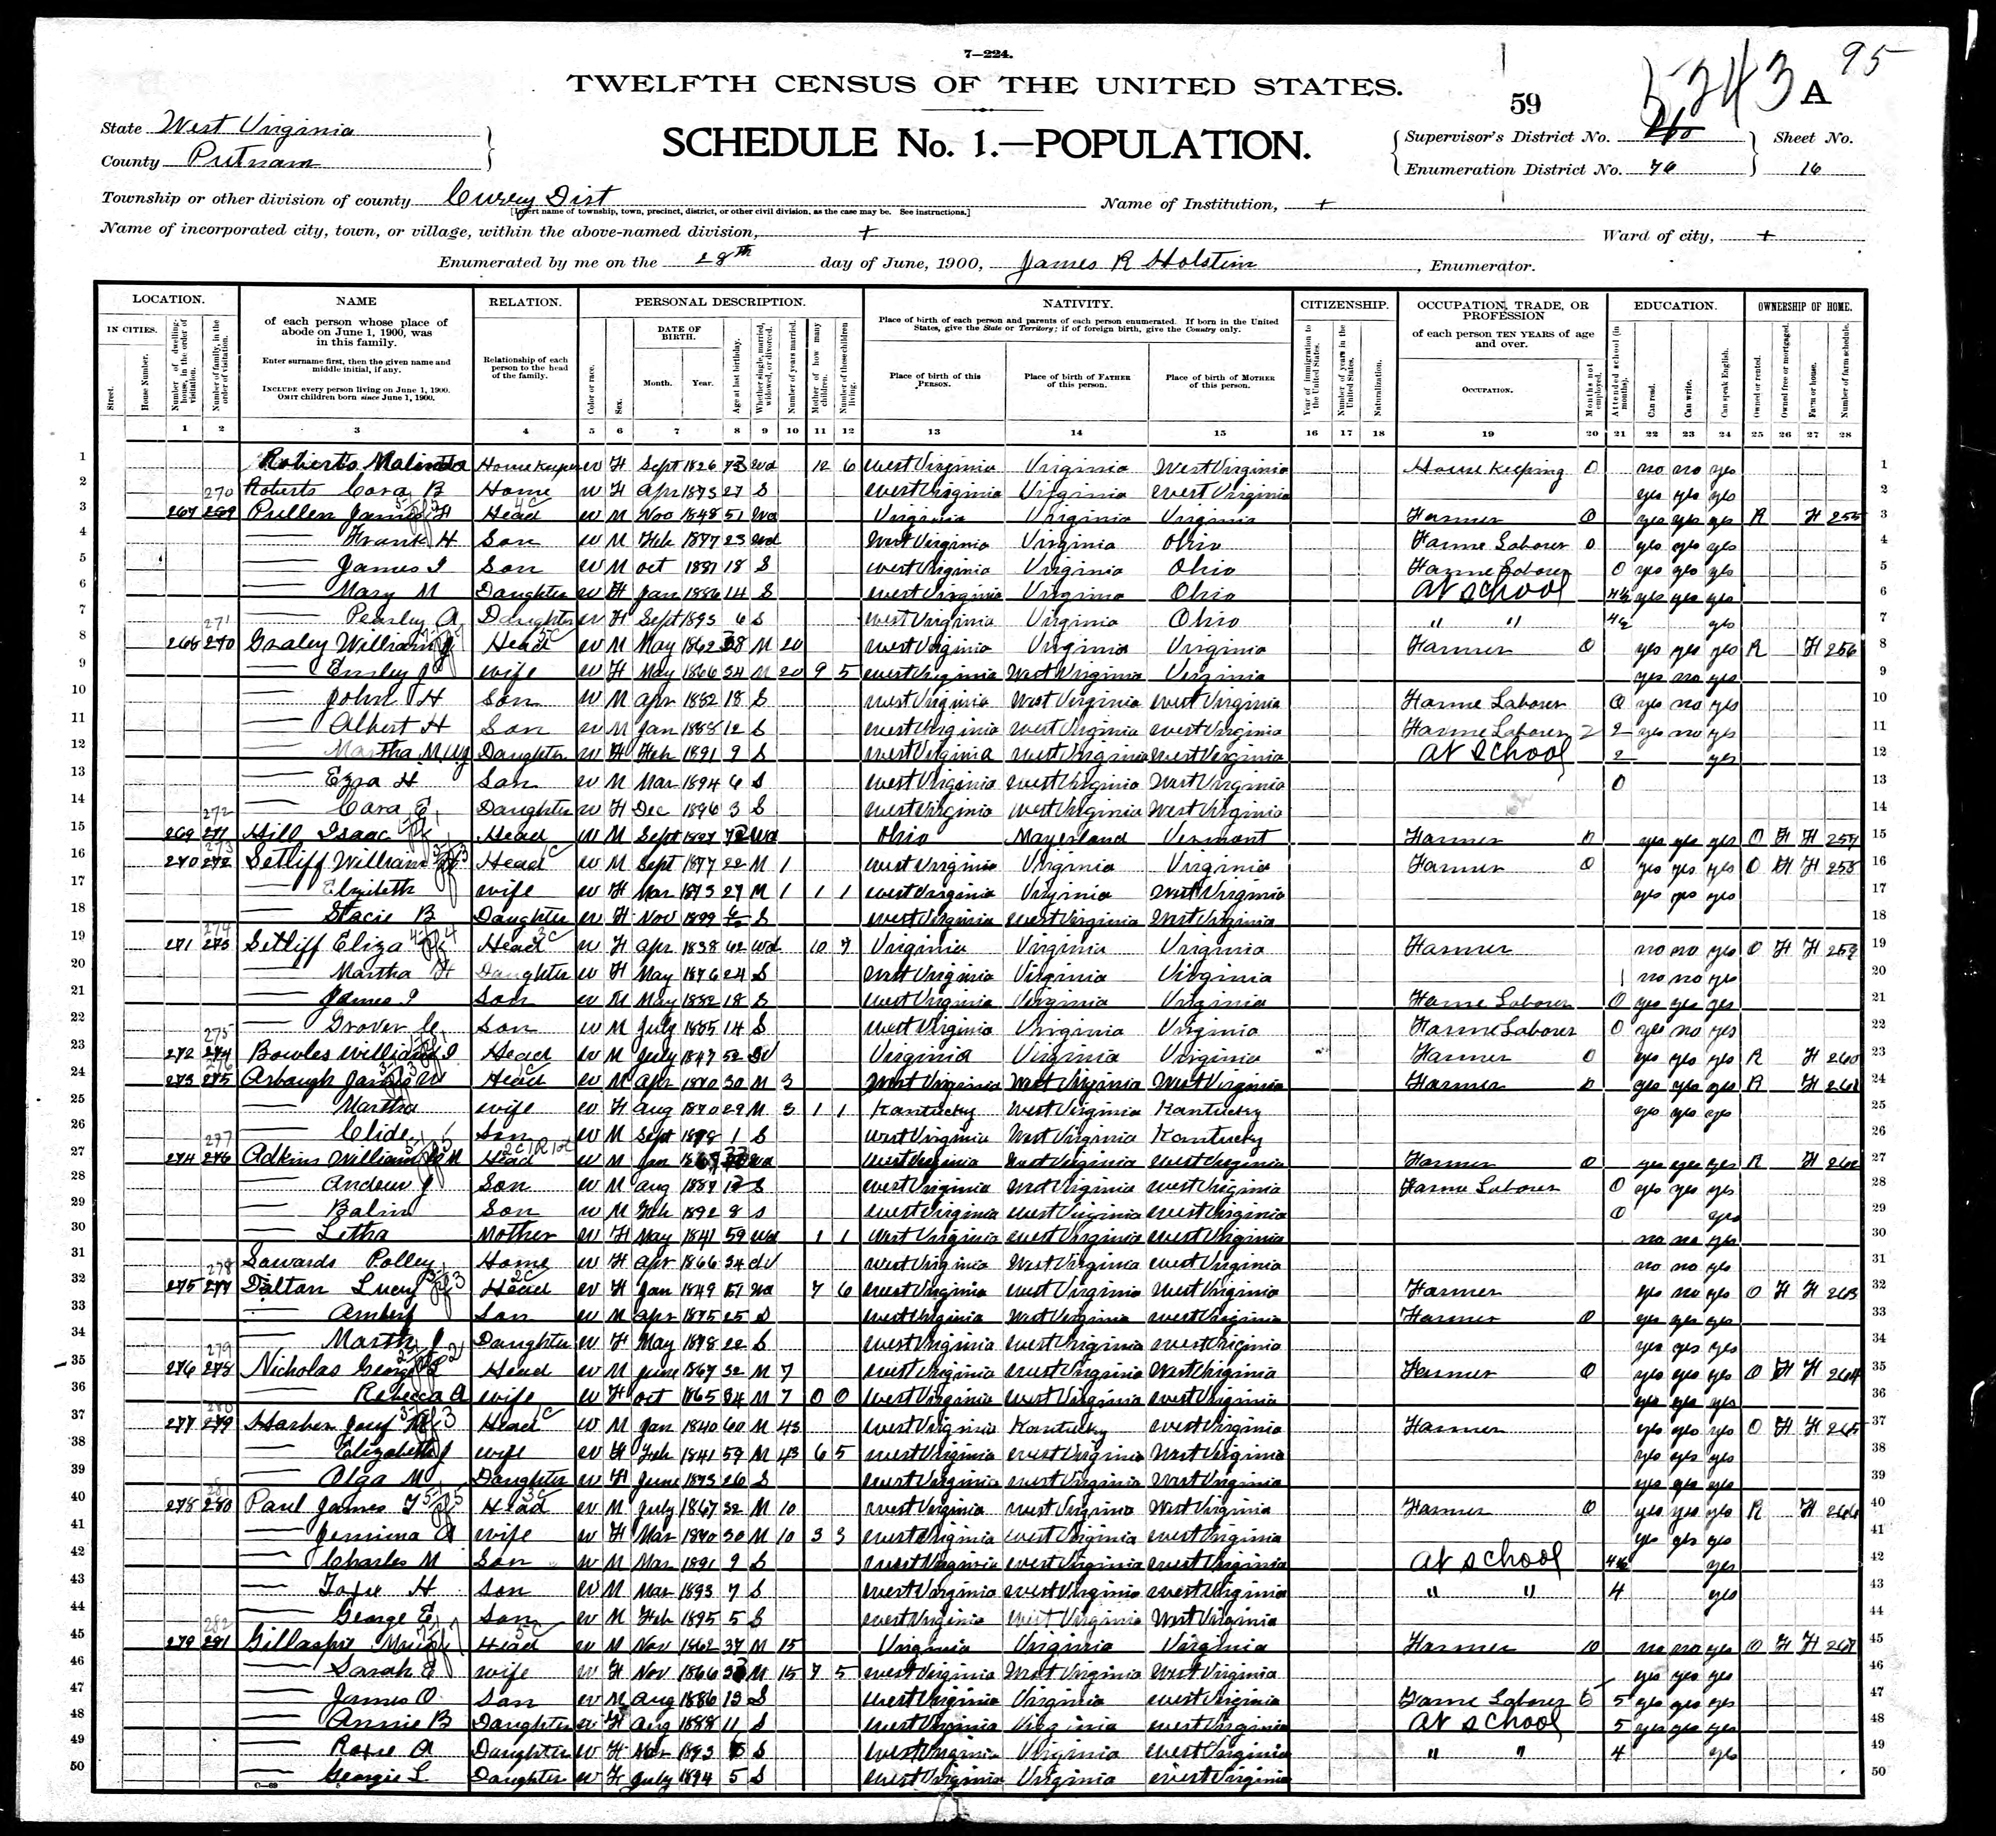 1900-WV Census, Curry District, Putnam Co, WV